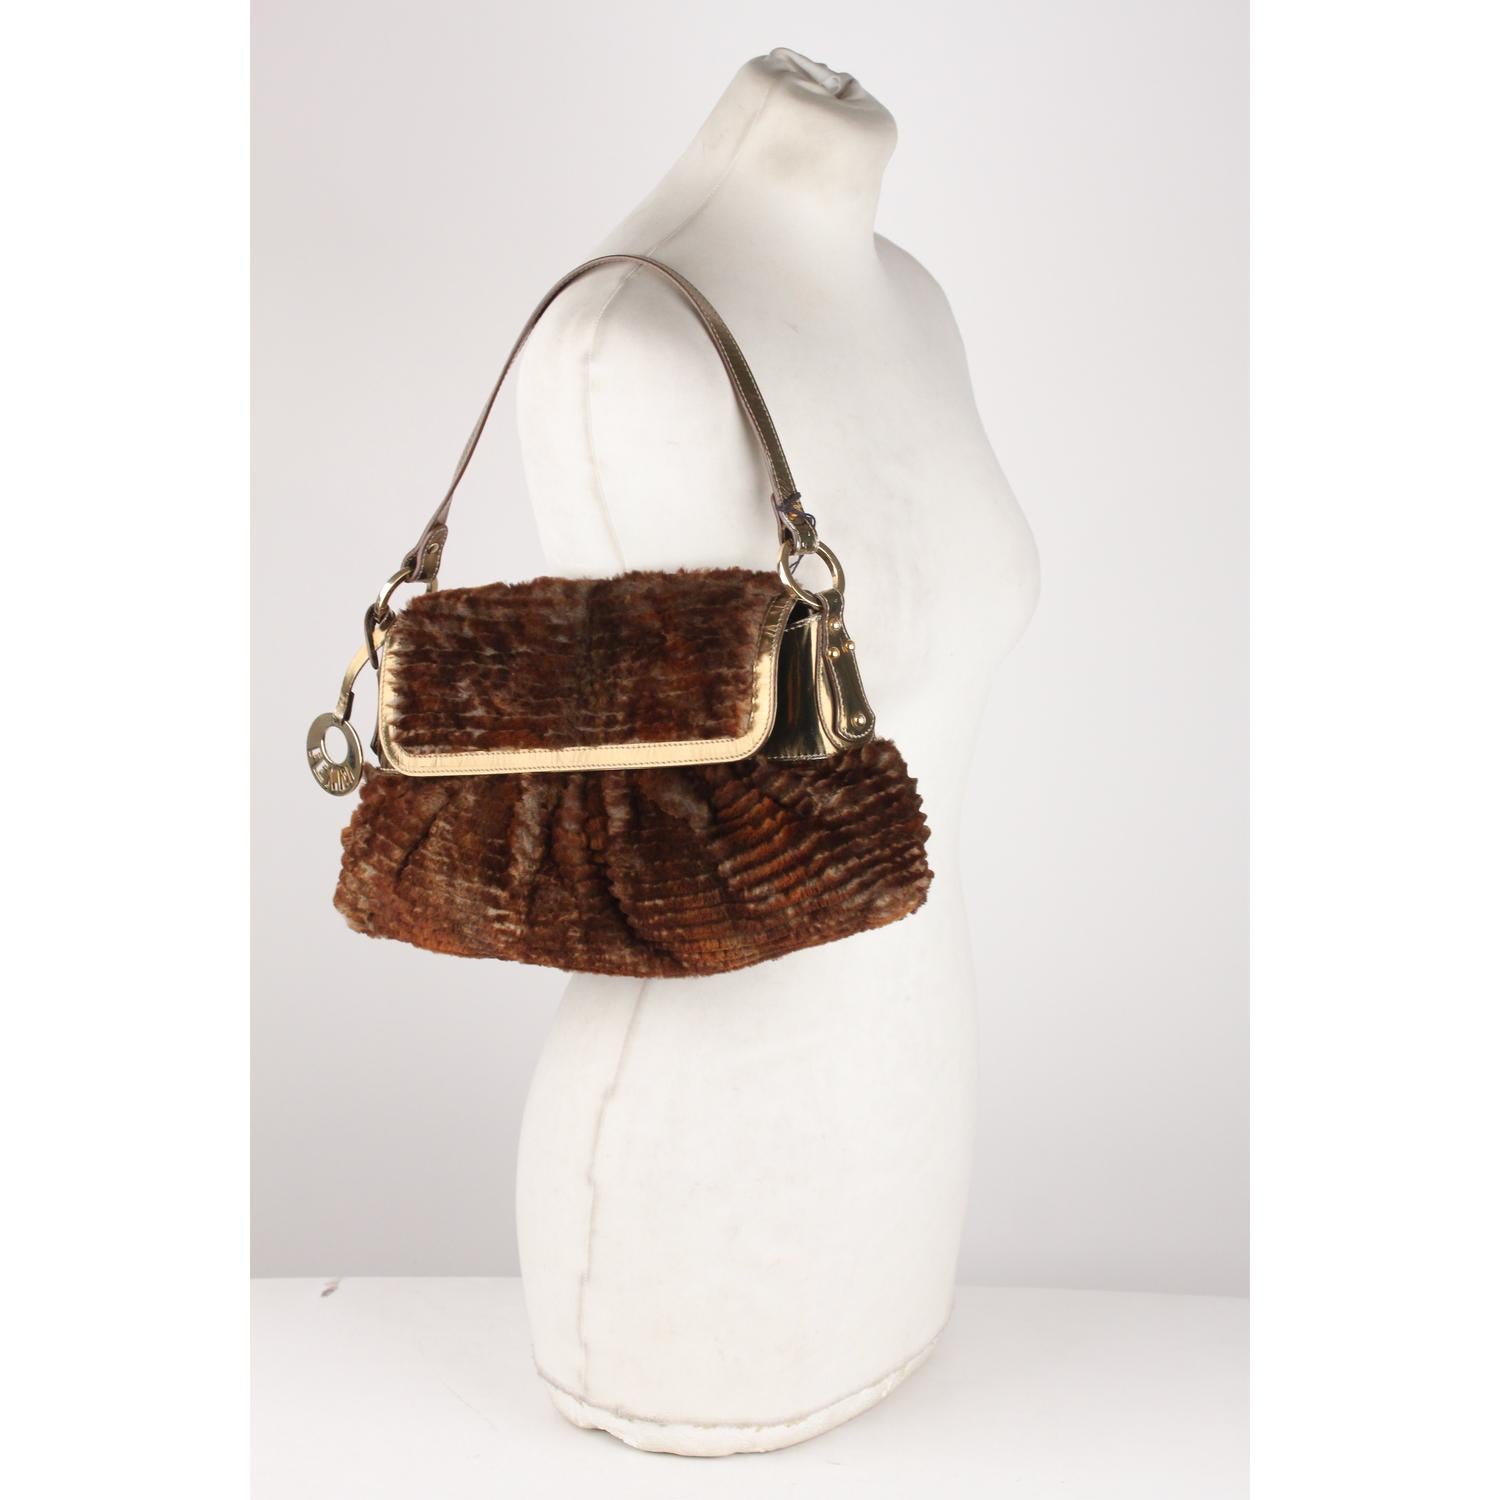 - Fendi 'Chef' Shoulder bag
- Brown lapin rabbit fur with metallic leather trim
- Gold metal Fendi logo charm dangling from one side
- Flap with magnetic button closure
- Orange satin lining
- 1 side open pocket inside 

Logos & tags: 'FENDI - made